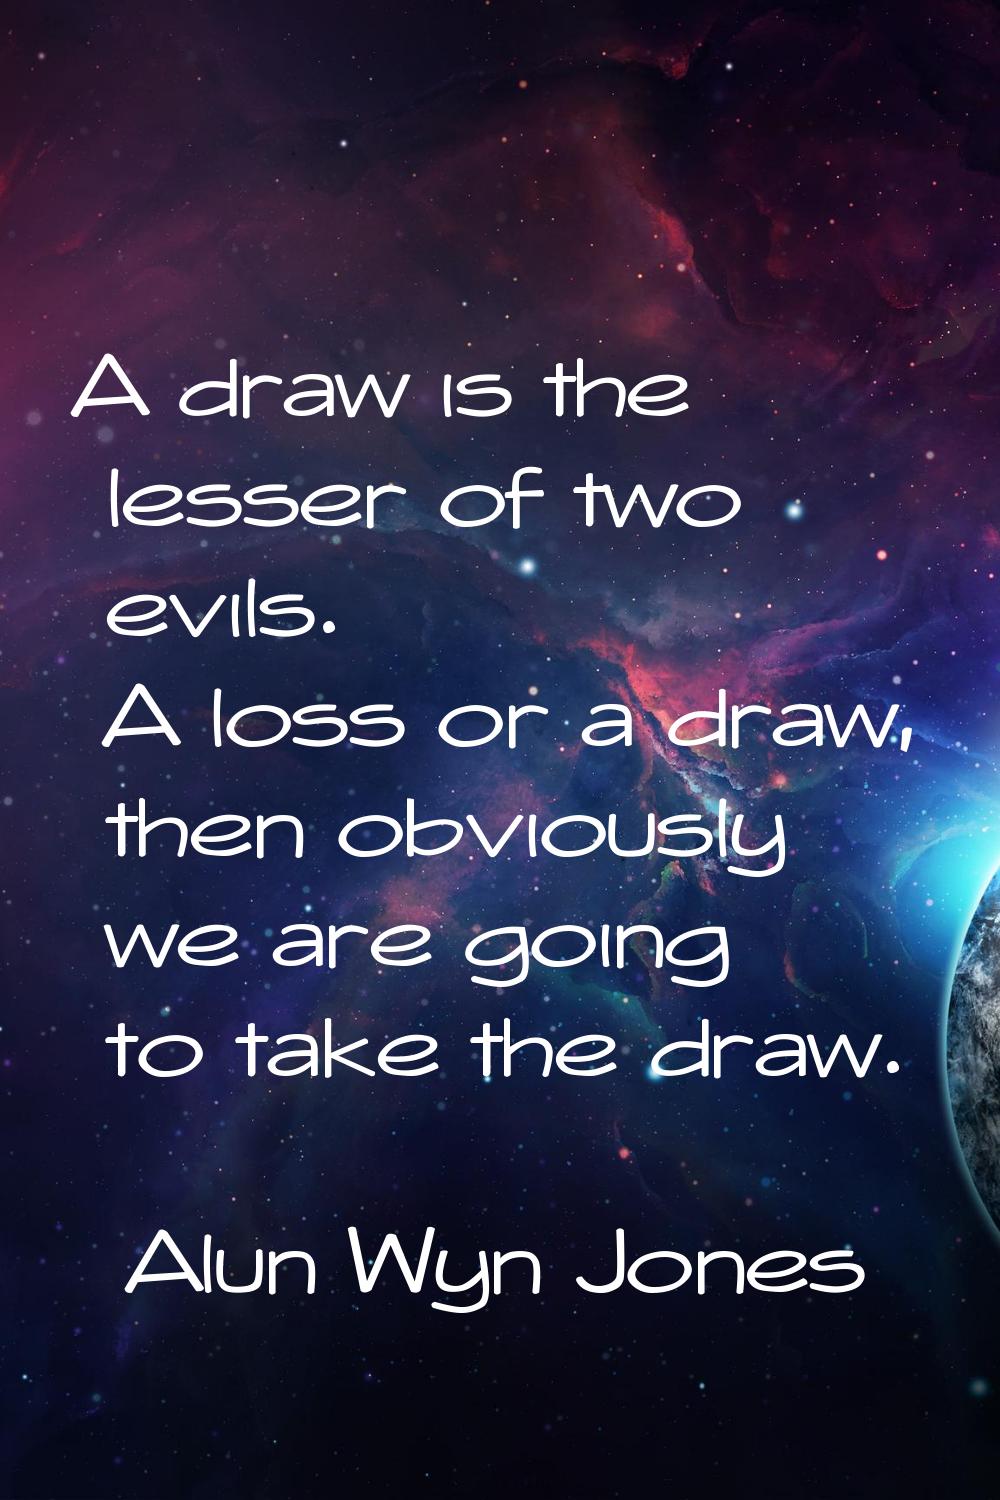 A draw is the lesser of two evils. A loss or a draw, then obviously we are going to take the draw.